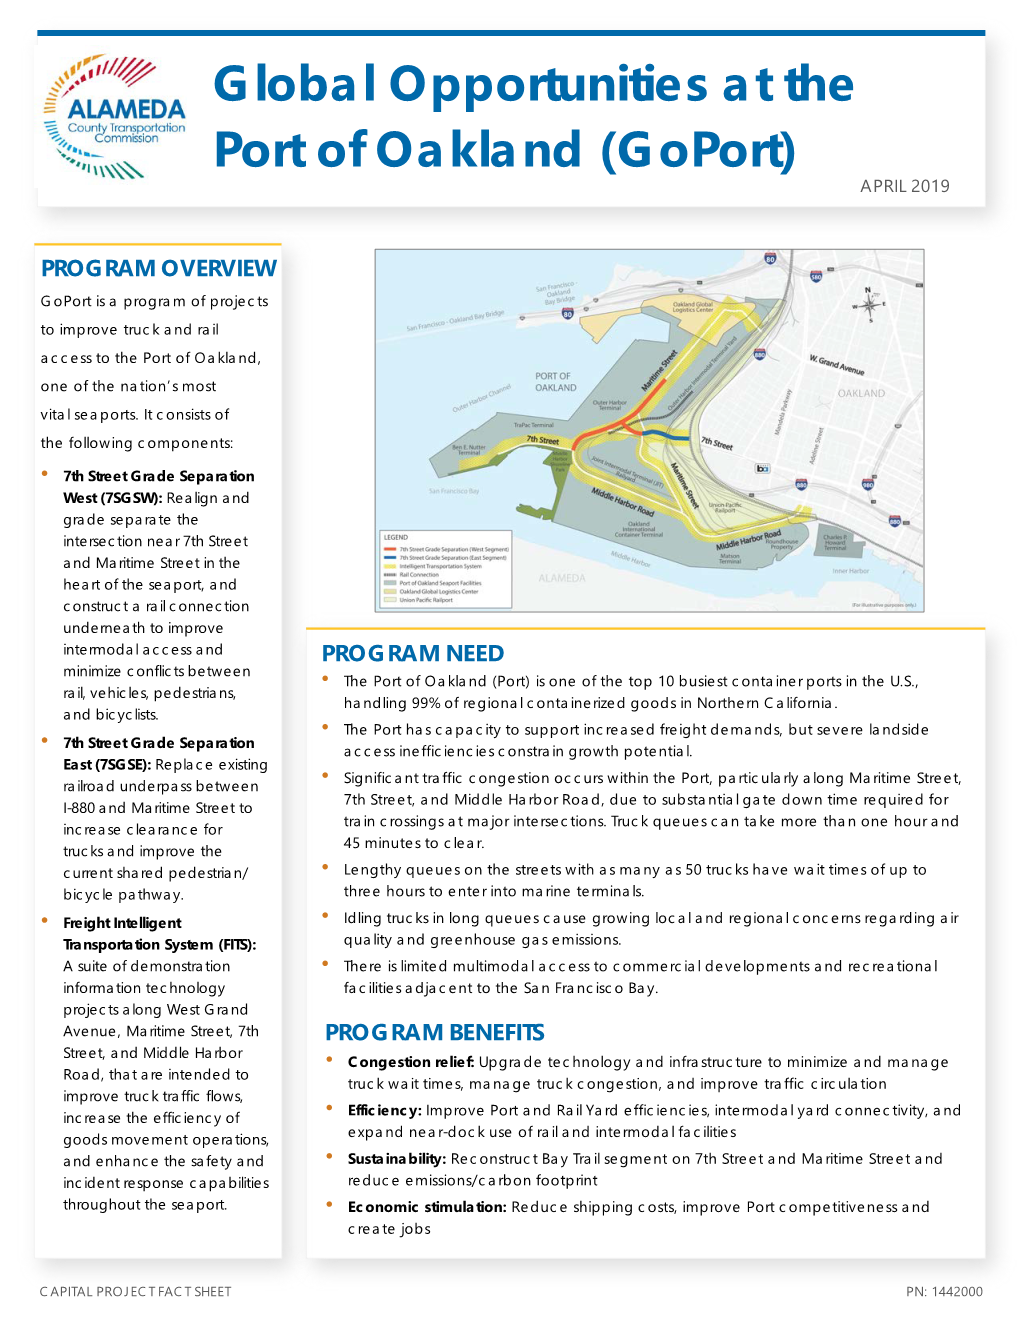 Global Opportunities at the Port of Oakland (Goport) APRIL 2019